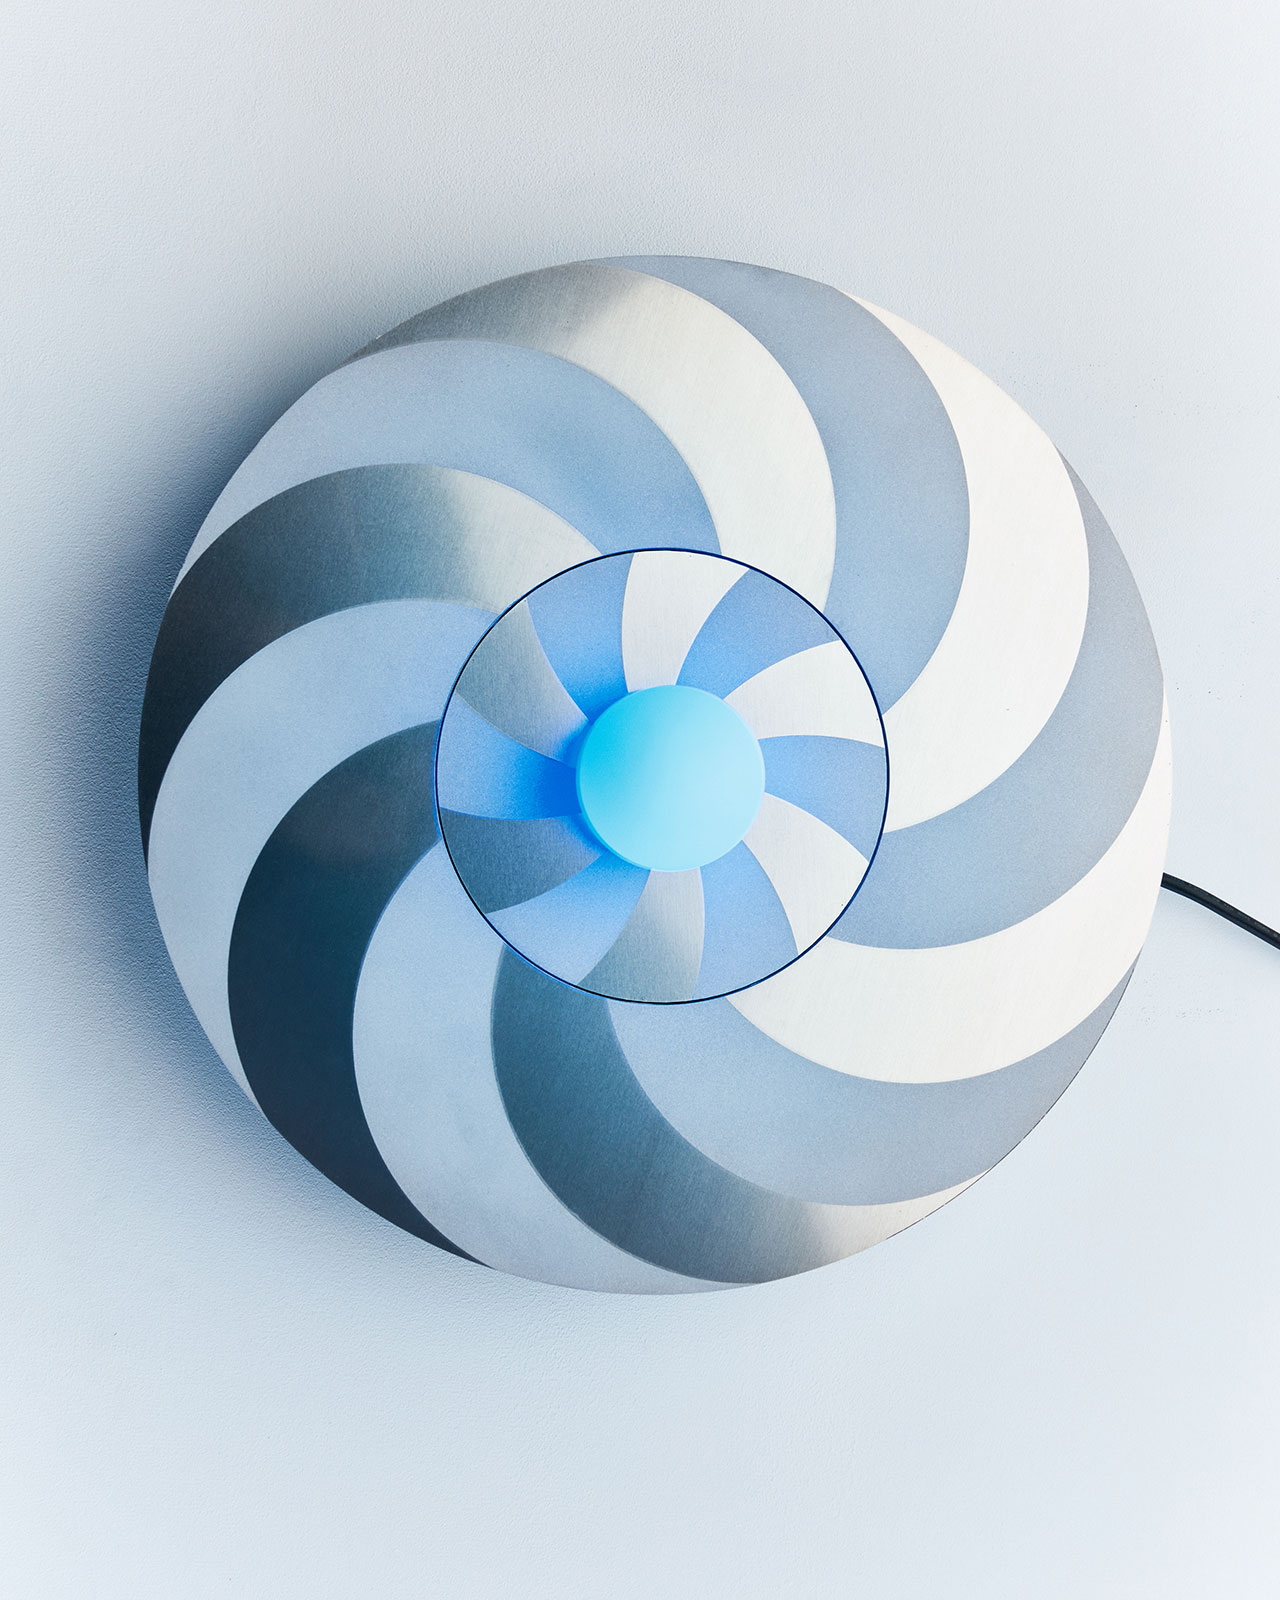 Vertigo.
Materials: aluminium, sandblasted glass globe, G4 blue LED nugget, printed technical parts, mechanical transmission systems, ball bearings, motor and electronic cards, converter (dimmable light).  
Dimensions: Ø47 x 15cm 
Photography by Stanislas Huaux &amp; Jeremy Marchant.
© Studio Élémentaires